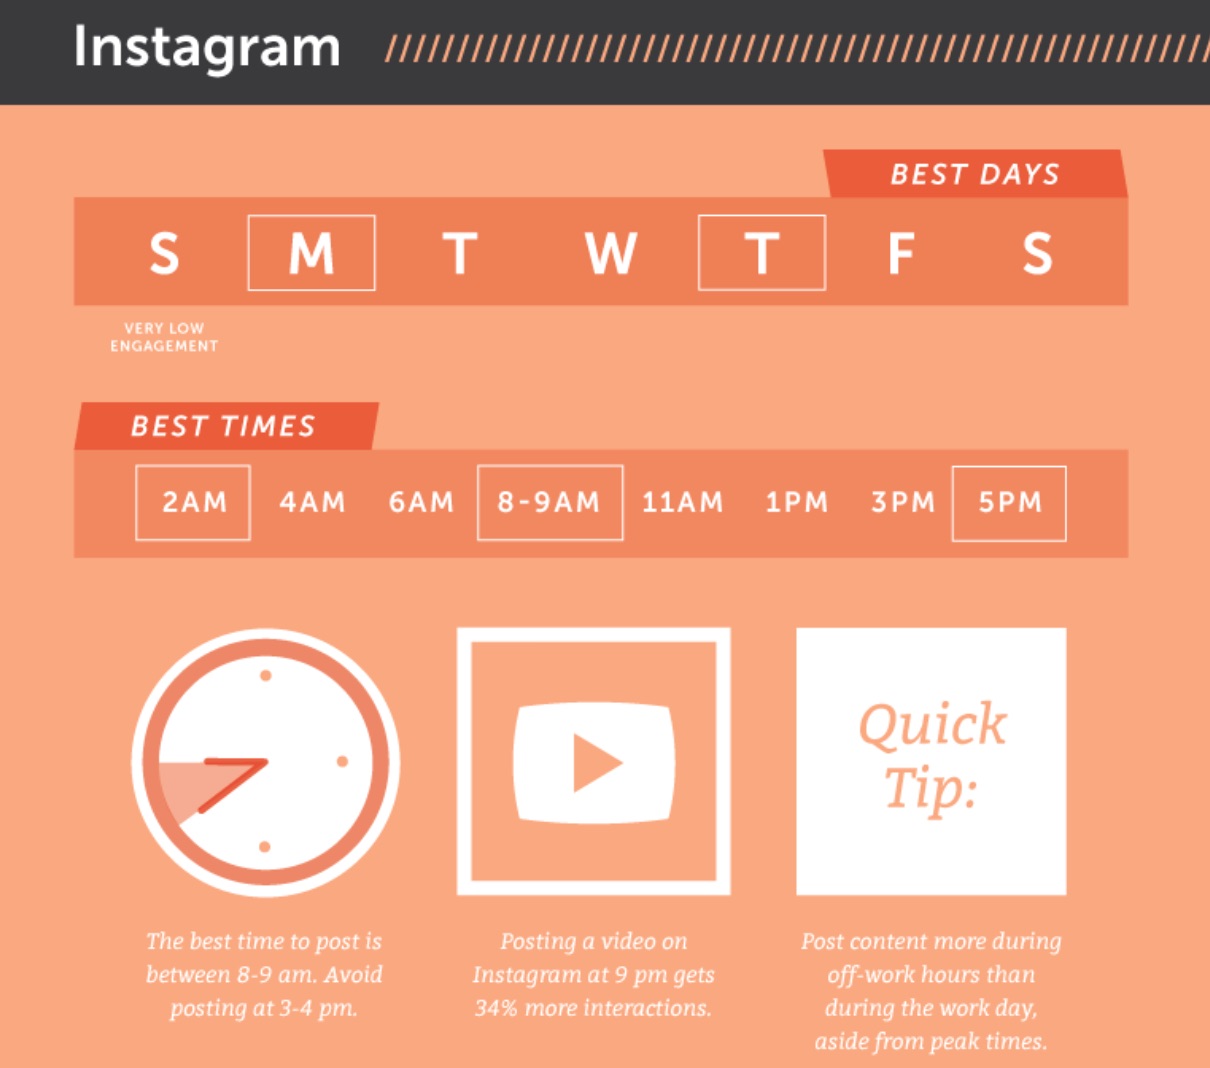 Best Times To Post On Social Media According To 20 Studies